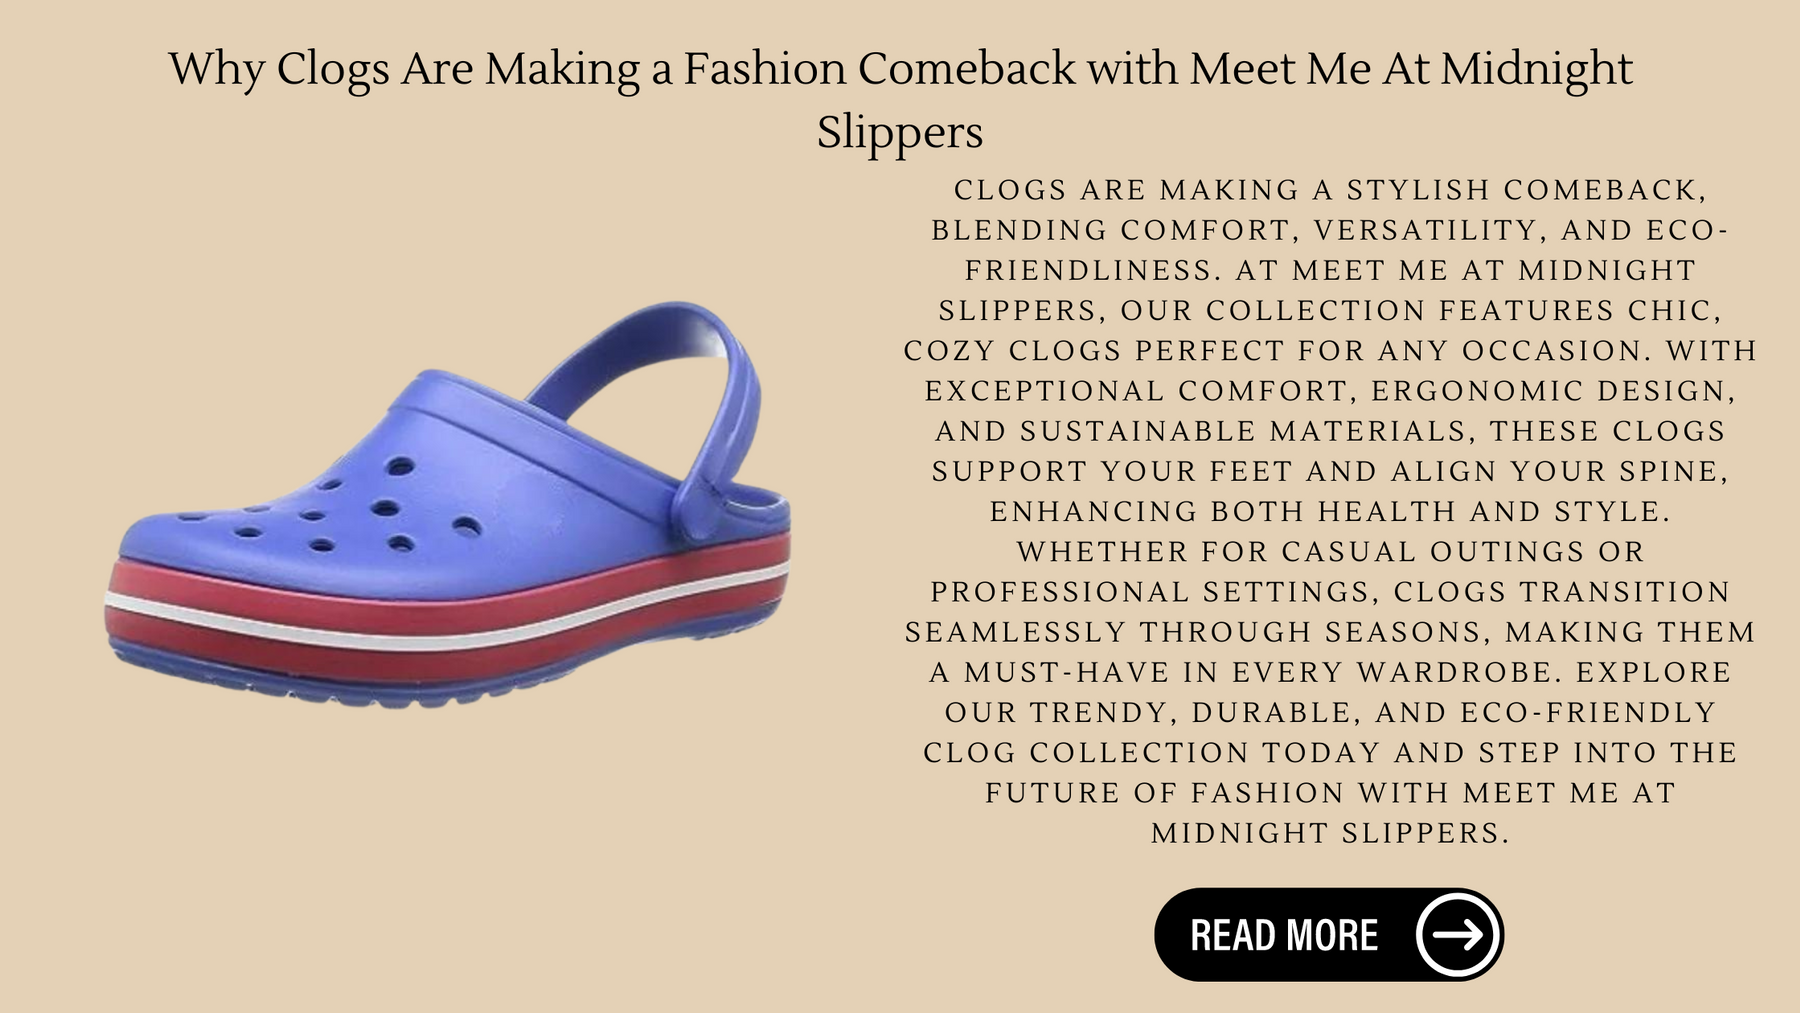 Why Clogs Are Making a Fashion Comeback with Meet Me At Midnight Slippers